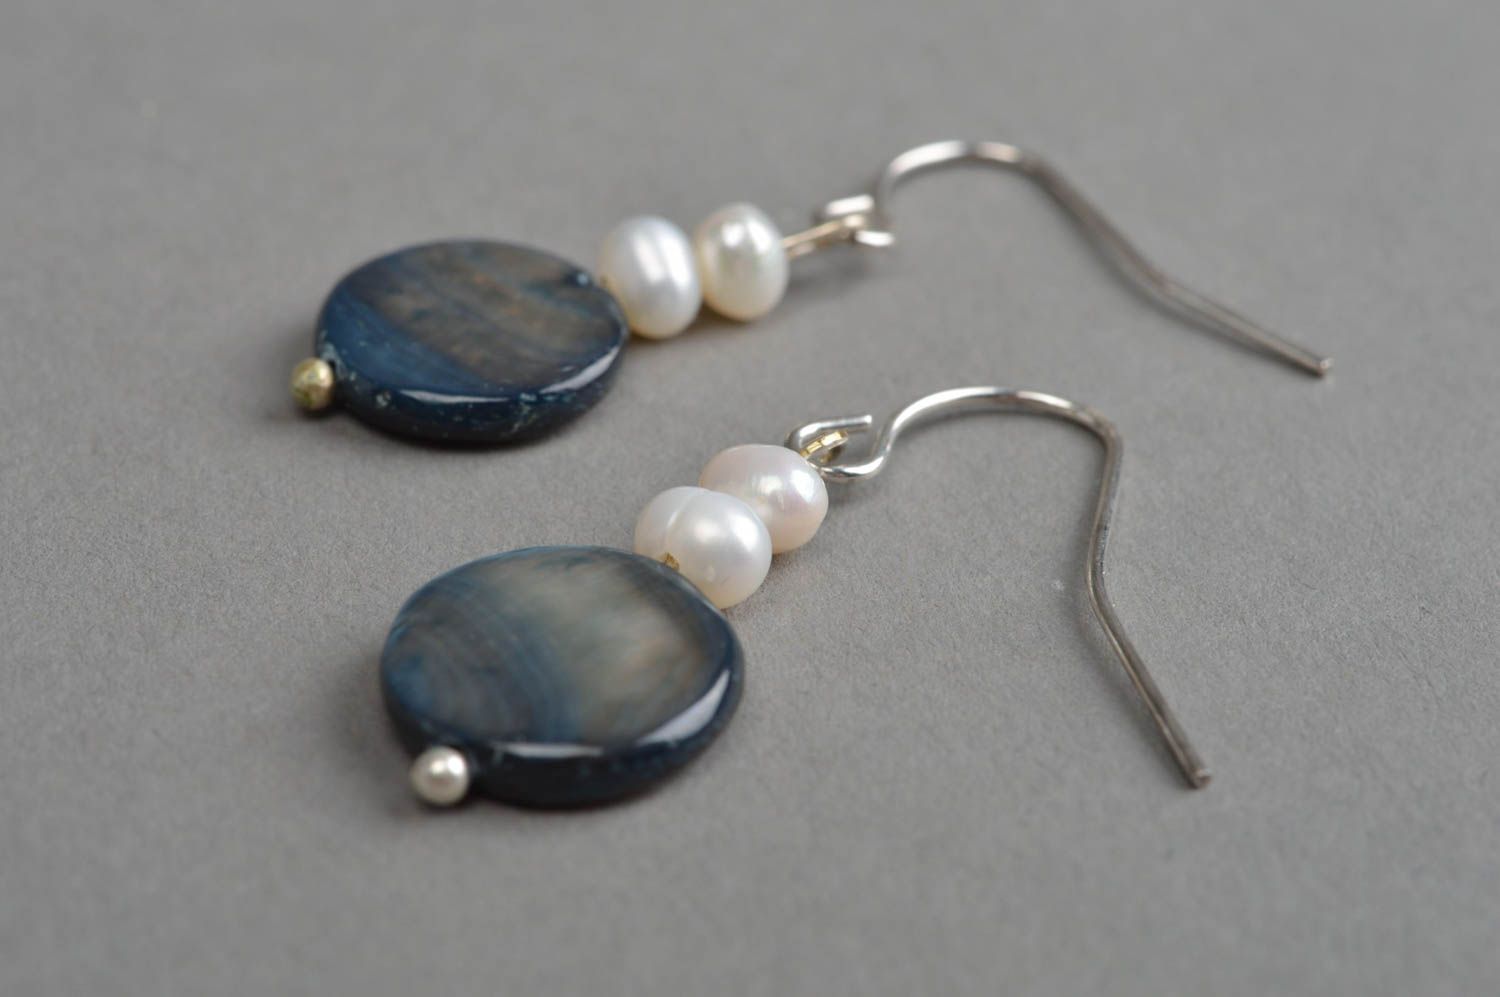 Handmade designer earrings jewelry made of natural stones unusual accessories photo 3